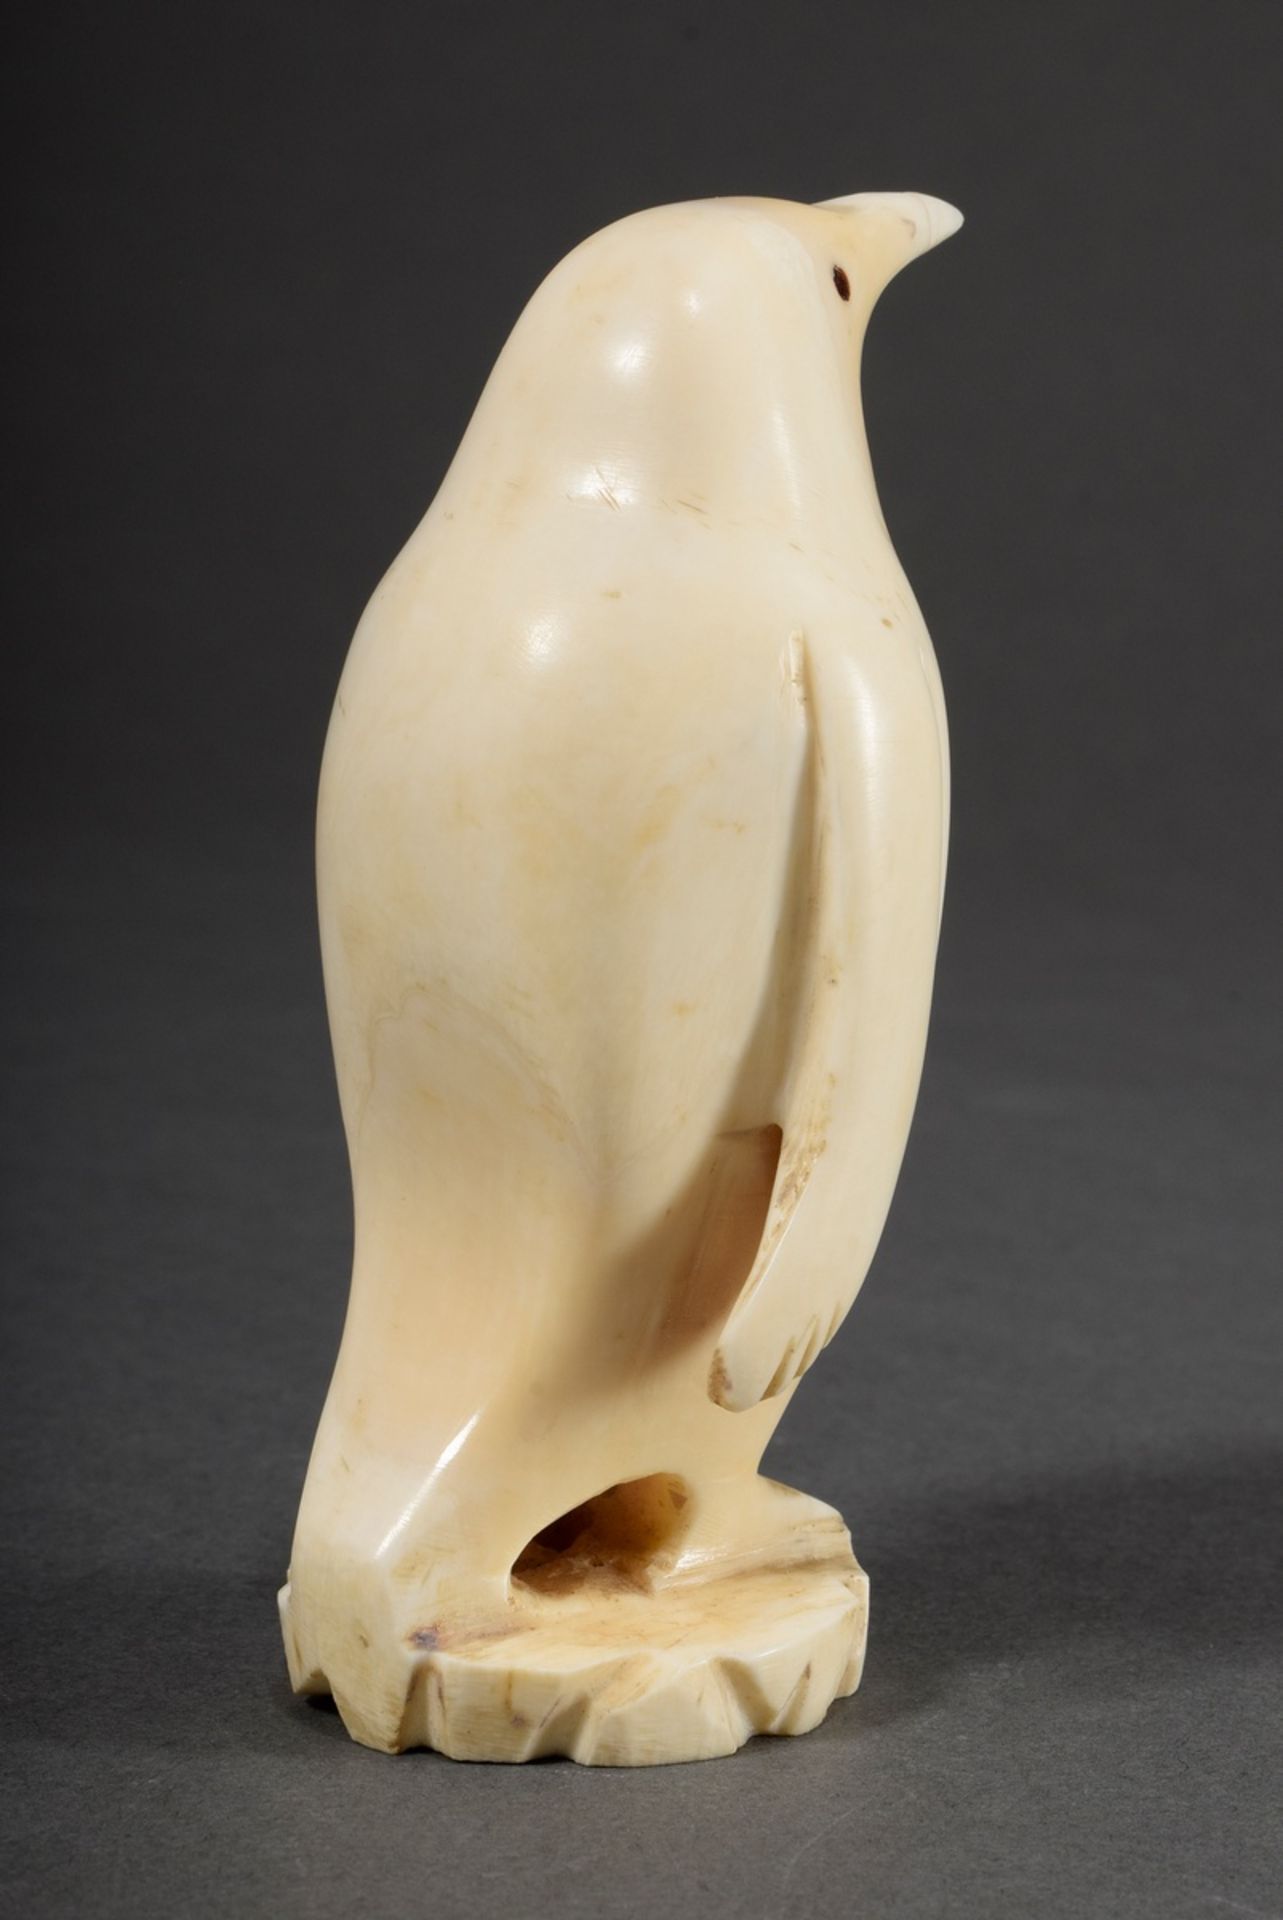 Scrimshaw "Penguin" of carved whale tooth with whale beard inlays, Inuit work, 19th c., h. 10.5cm,  - Image 3 of 6